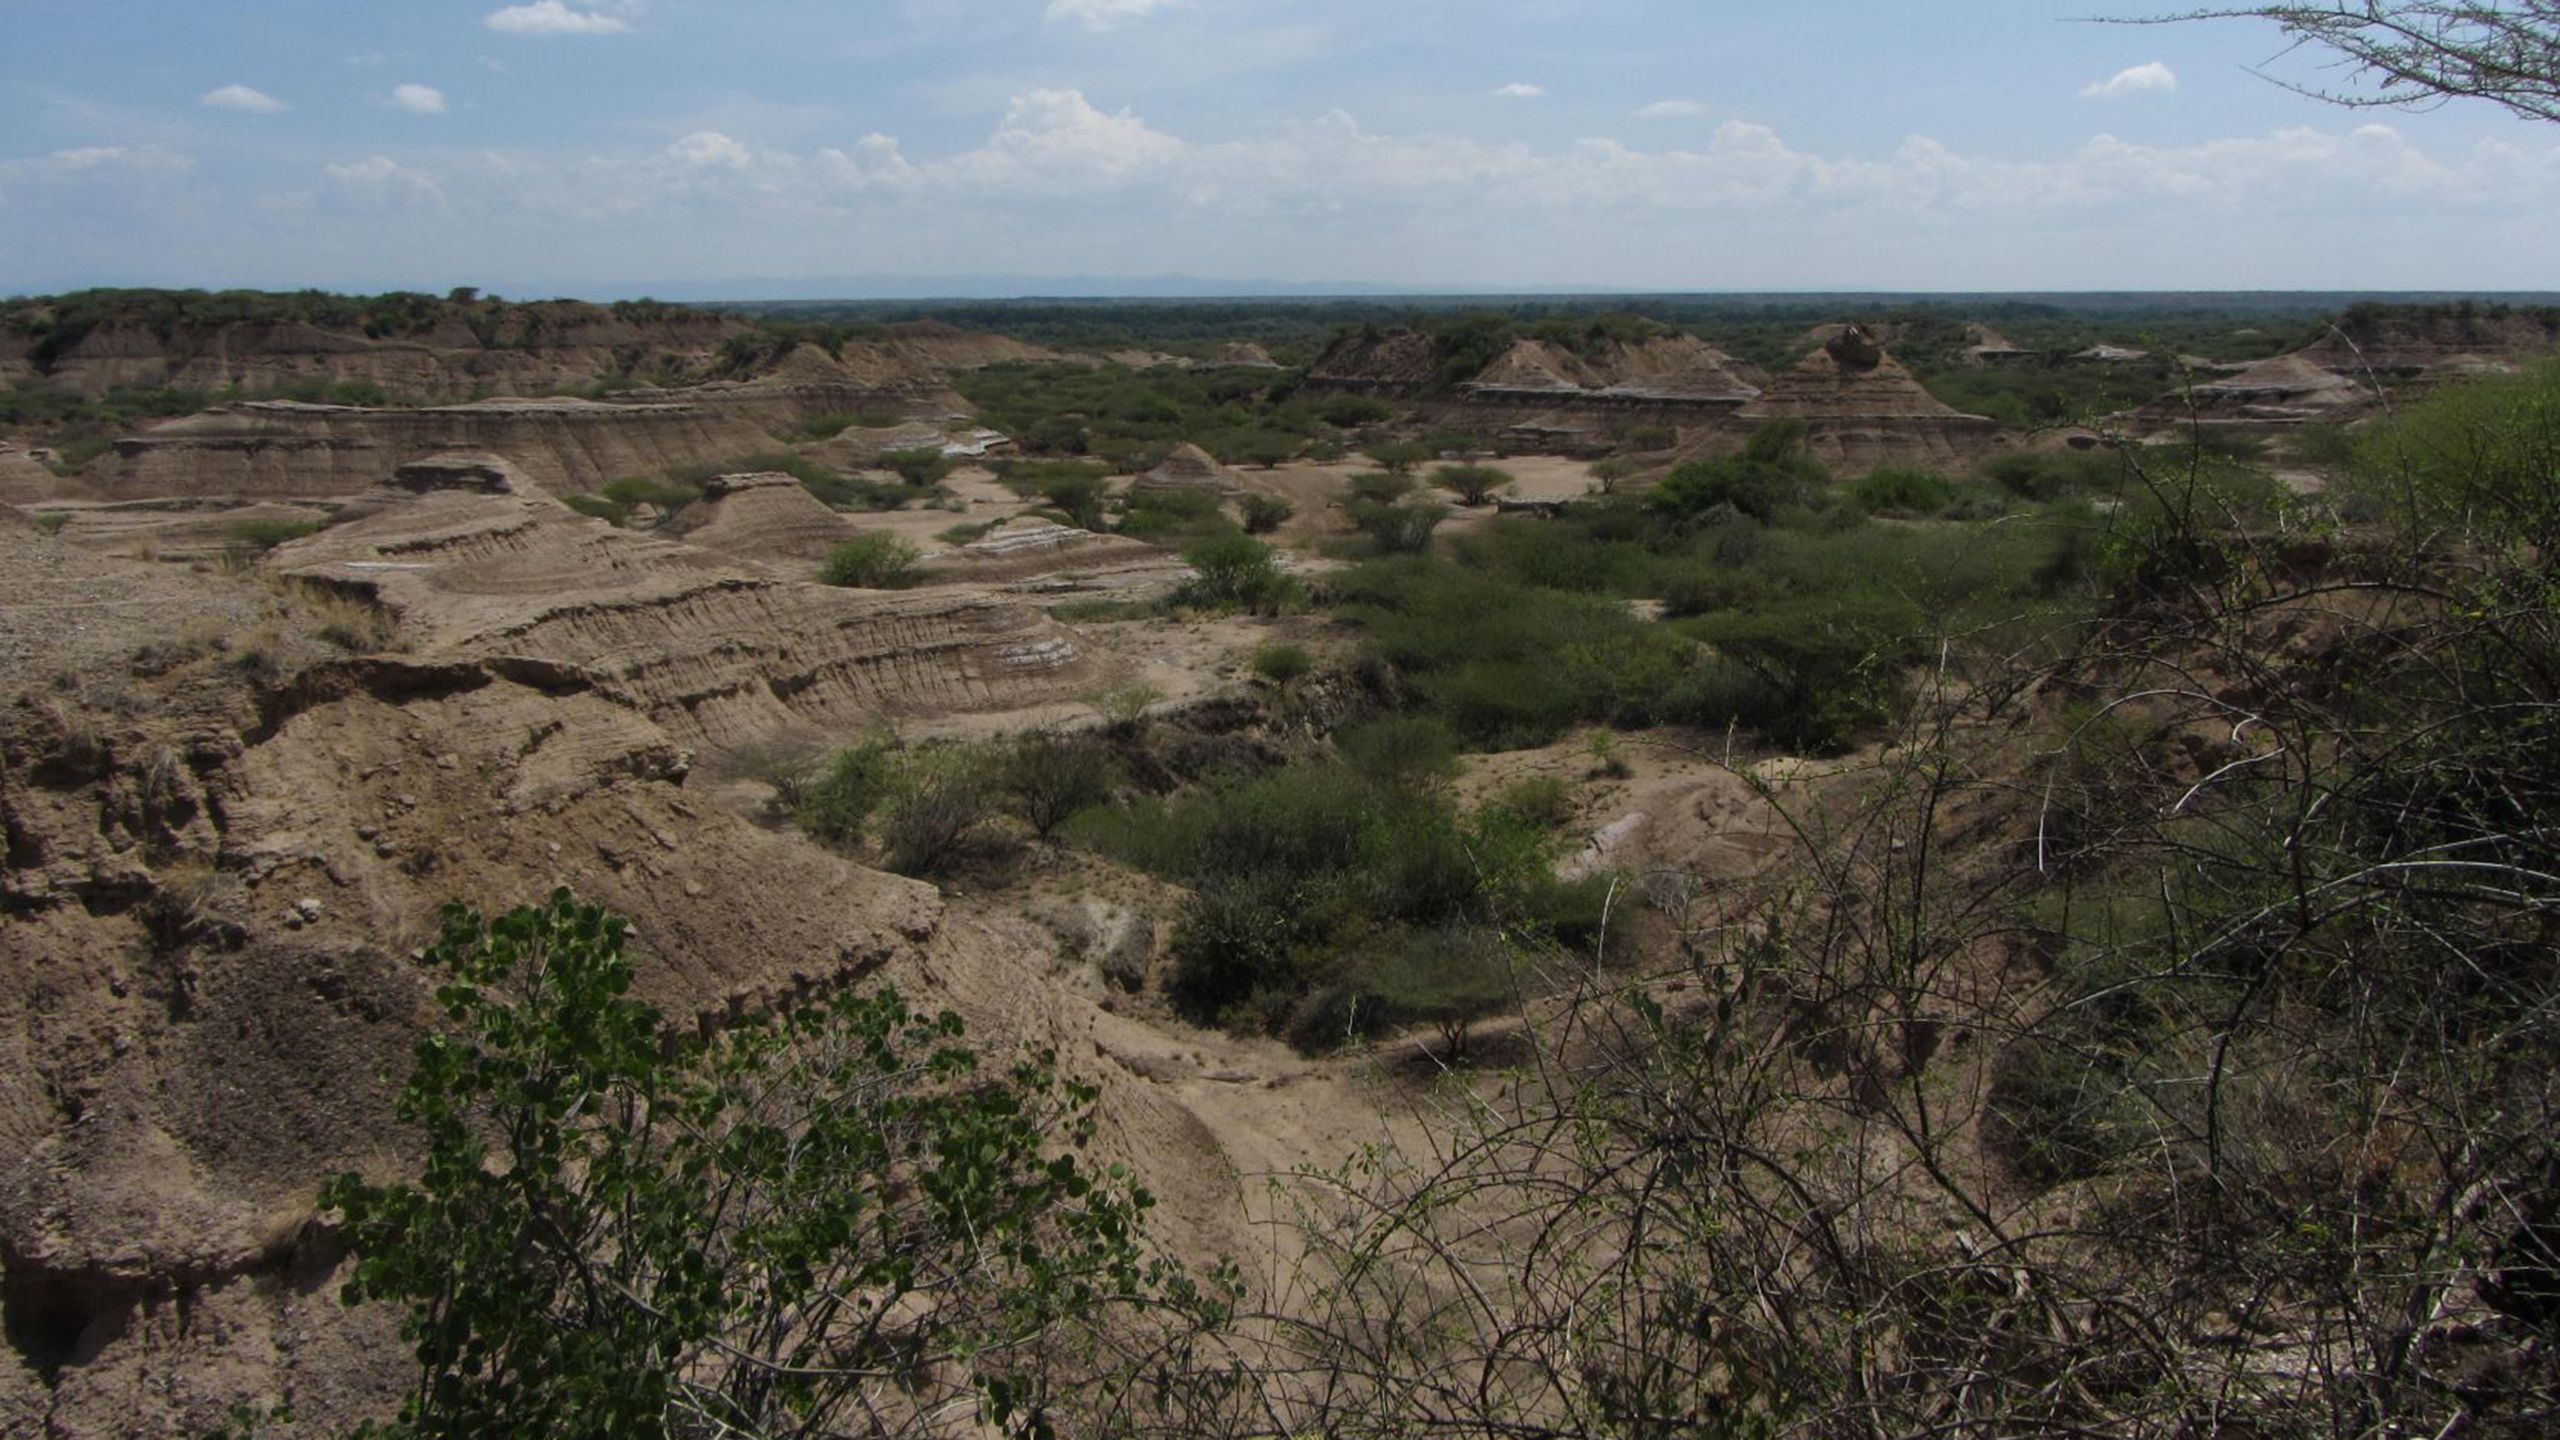 A view of the Omo-Kibish geological formation in southwestern Ethiopia.